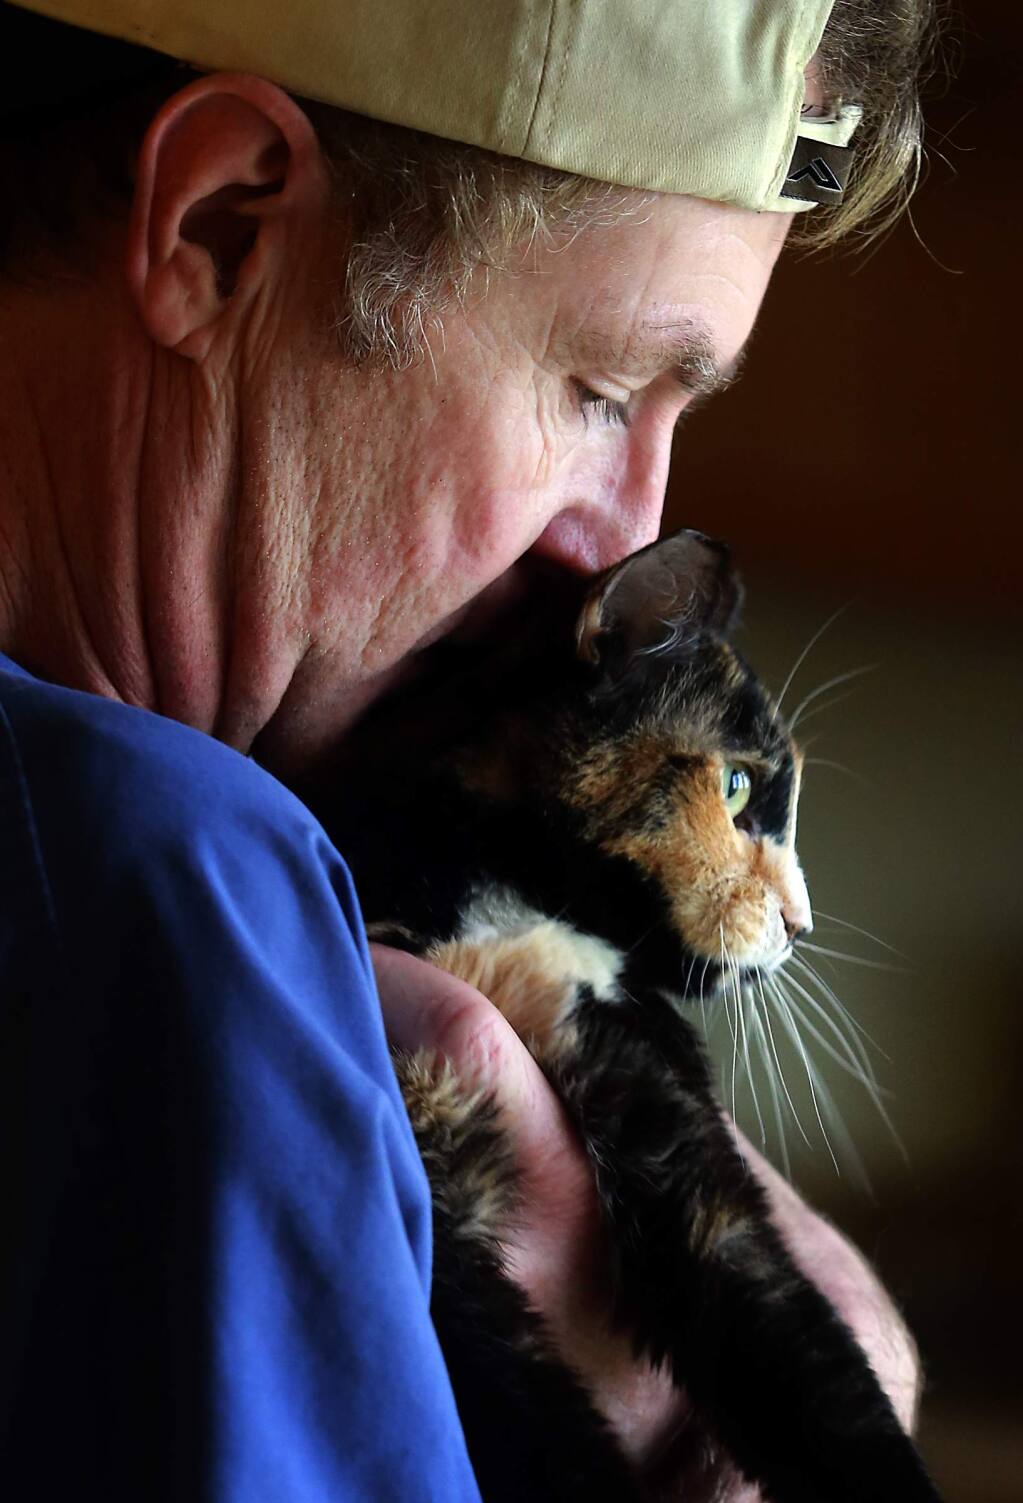 PHOTO: 2 by JOHN BURGESS / The Press Democrat -Darryl Roberts snuggles with Pumpkin, who is afflicted with cerebellar hypoplasia and has difficulties walking. Roberts founded SNAP Cats for abused, injured and disabled cats out of his Dry Creek apartment.